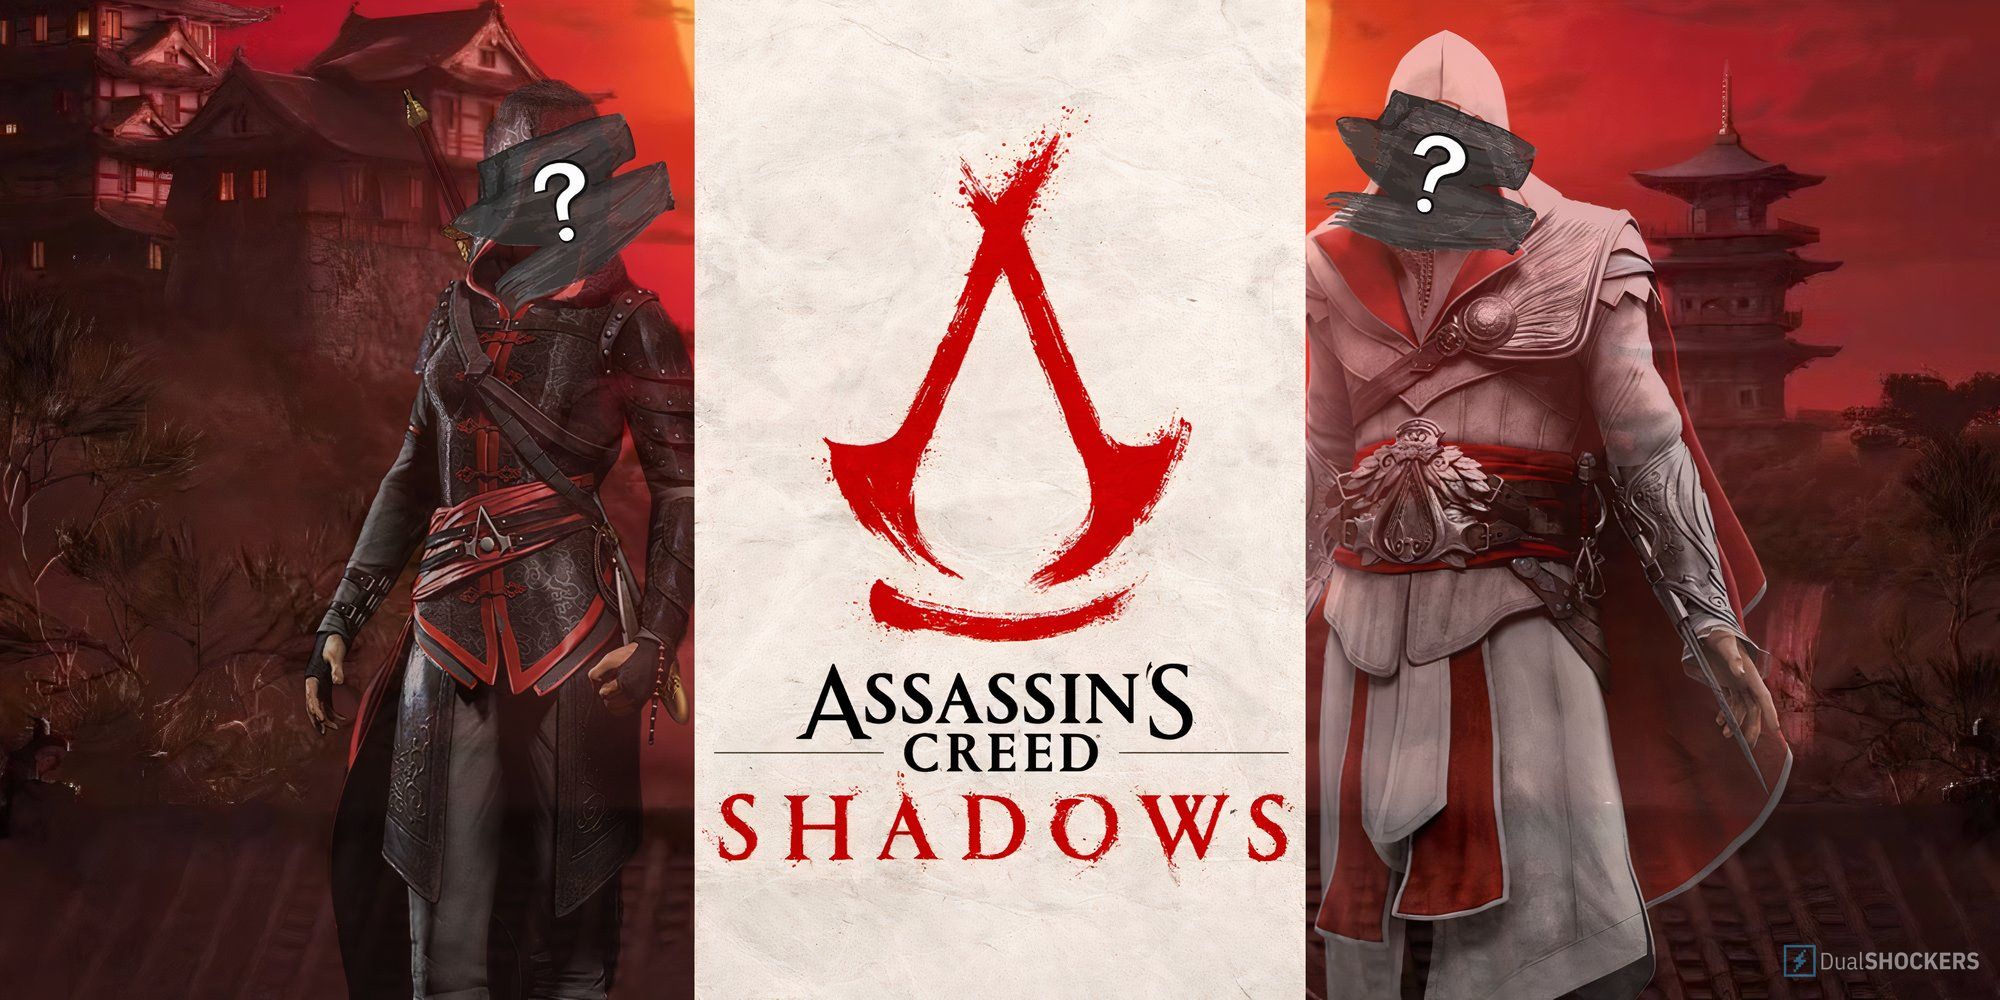 Feature image showing the Assassin's Creed Shadows logo in between two protagonists with their faces blurred out with question marks.